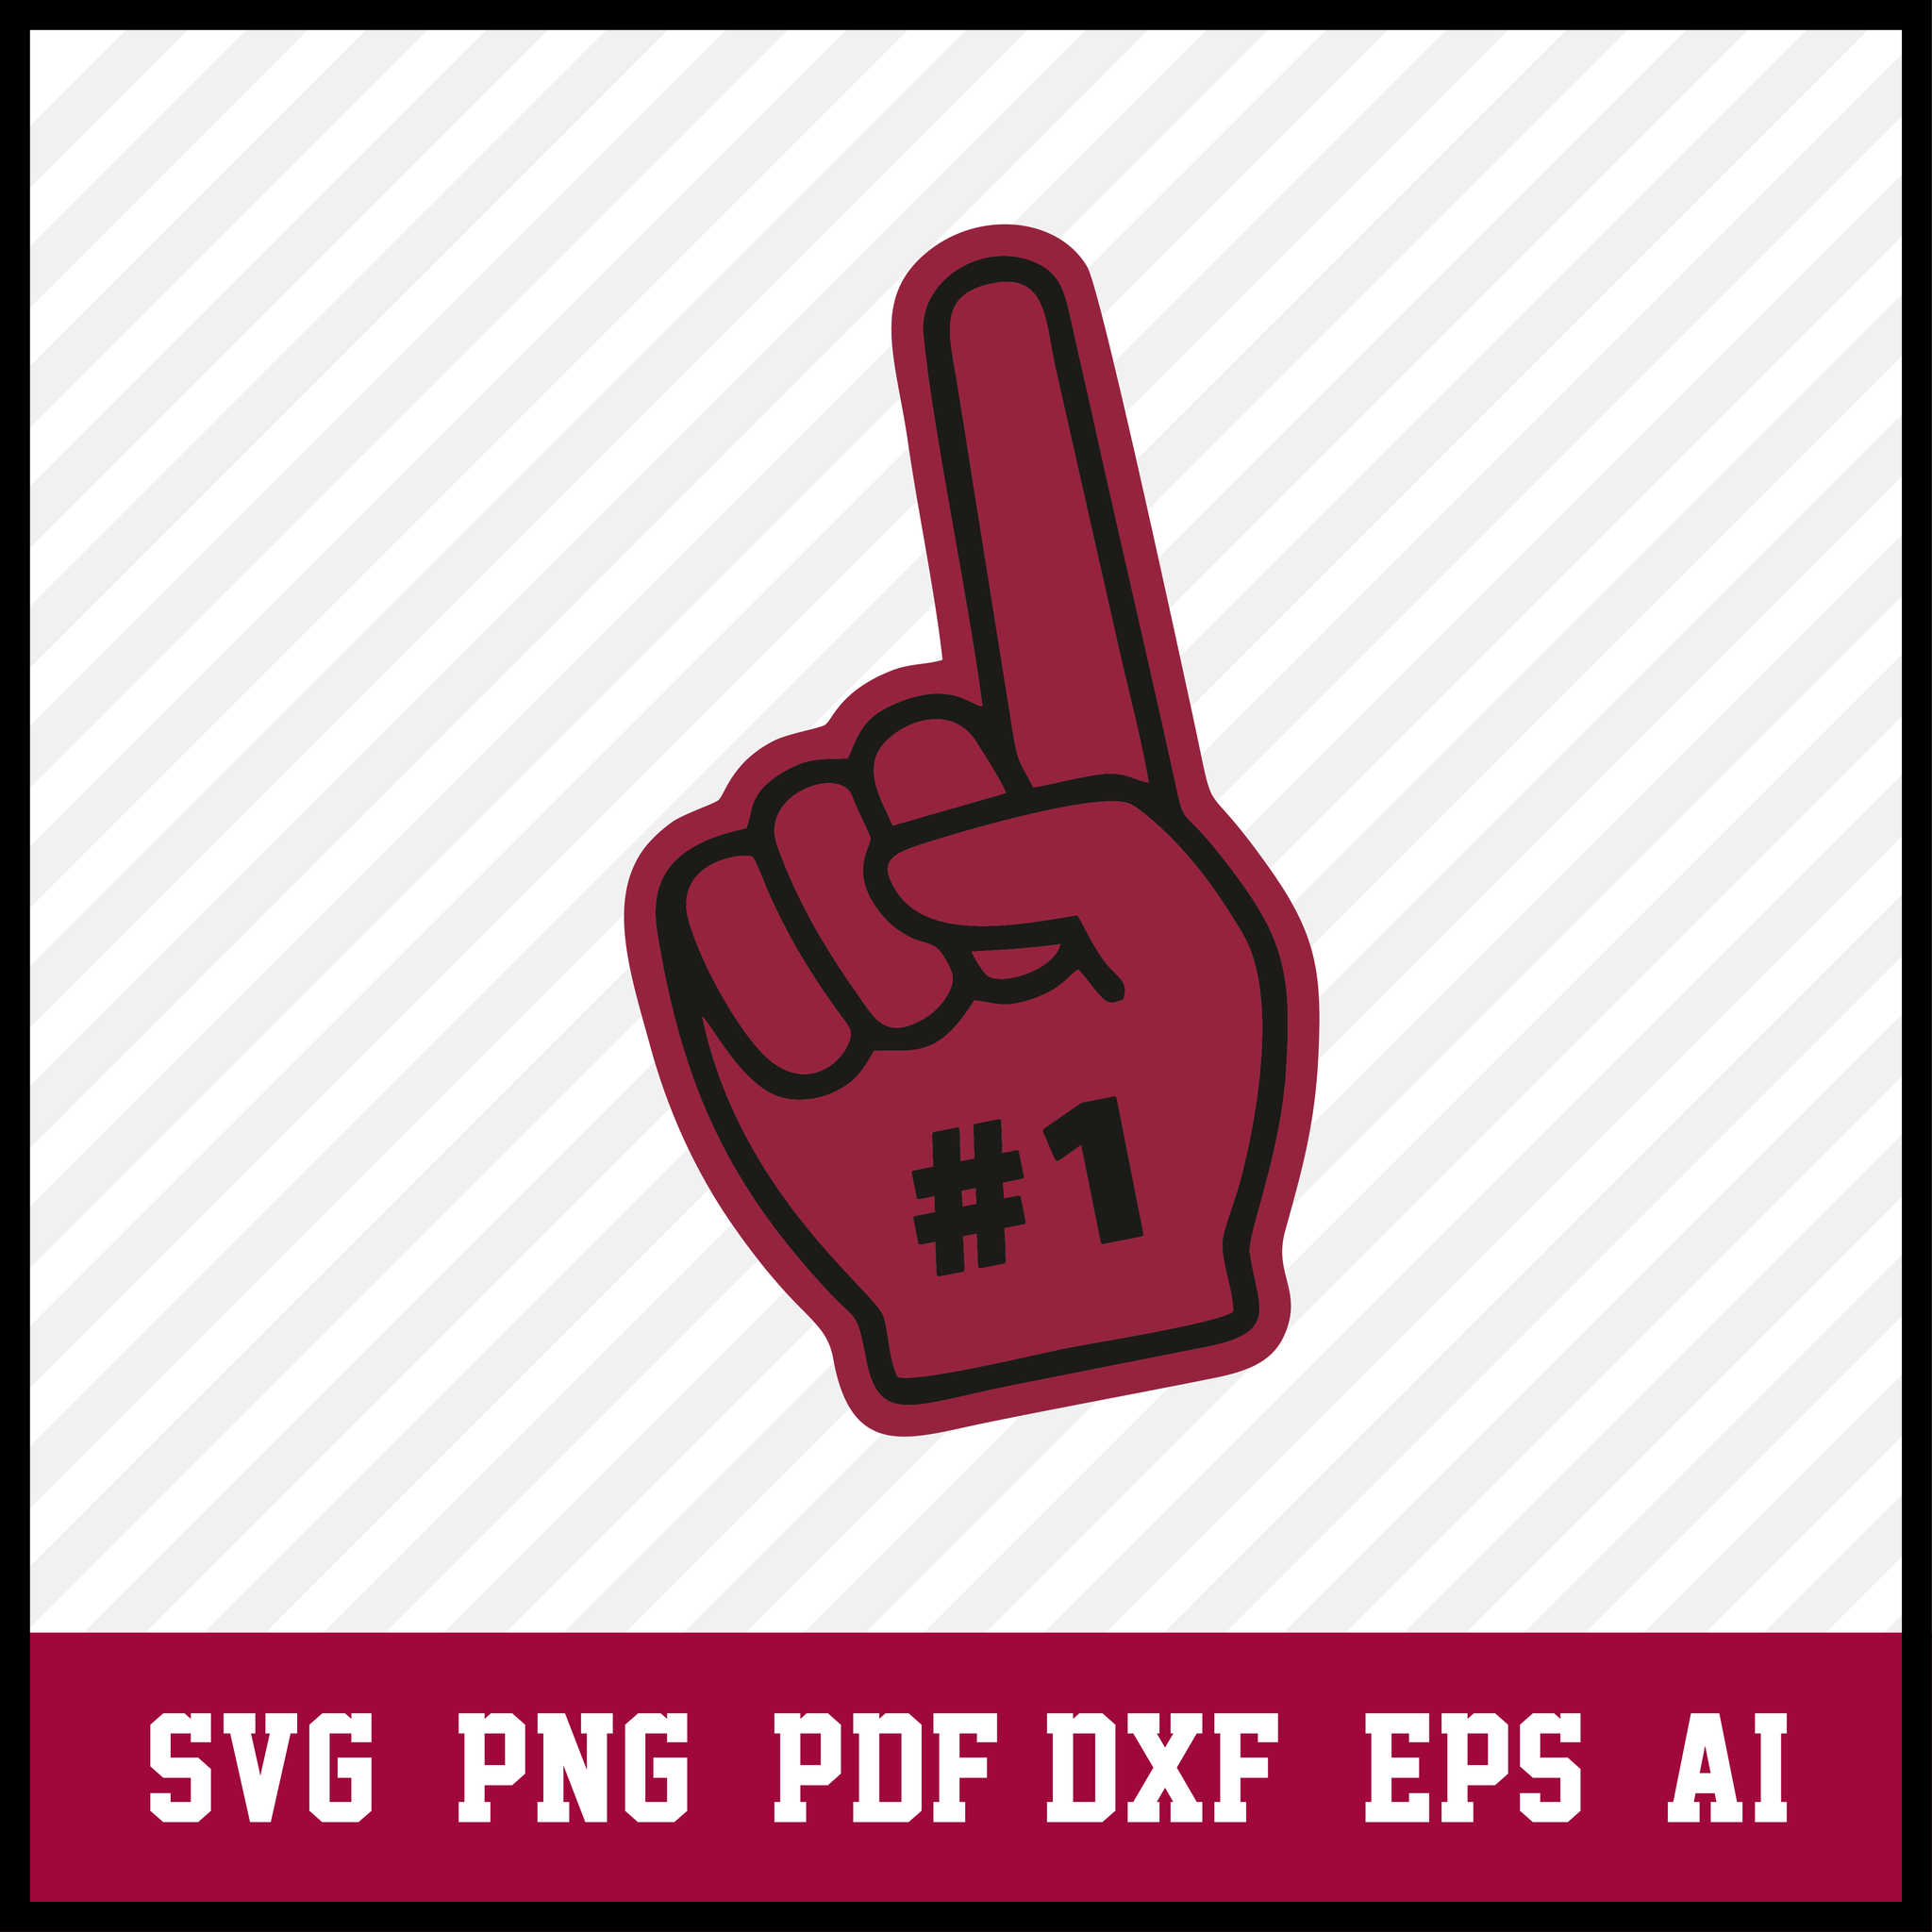 Number One Arizona Cardinals Foam Finger SVG, Cardinals Svg, Arizona Cardinals Logo, Cardinals Clipart, Football SVG bundle, Svg File for cricut, Nfl Svg  • INSTANT Digital DOWNLOAD includes: 1 Zip and the following file formats: SVG, DXF, PNG, AI, PDF  • Artwork files are perfect for printing, resizing, coloring and modifying with the appropriate software.